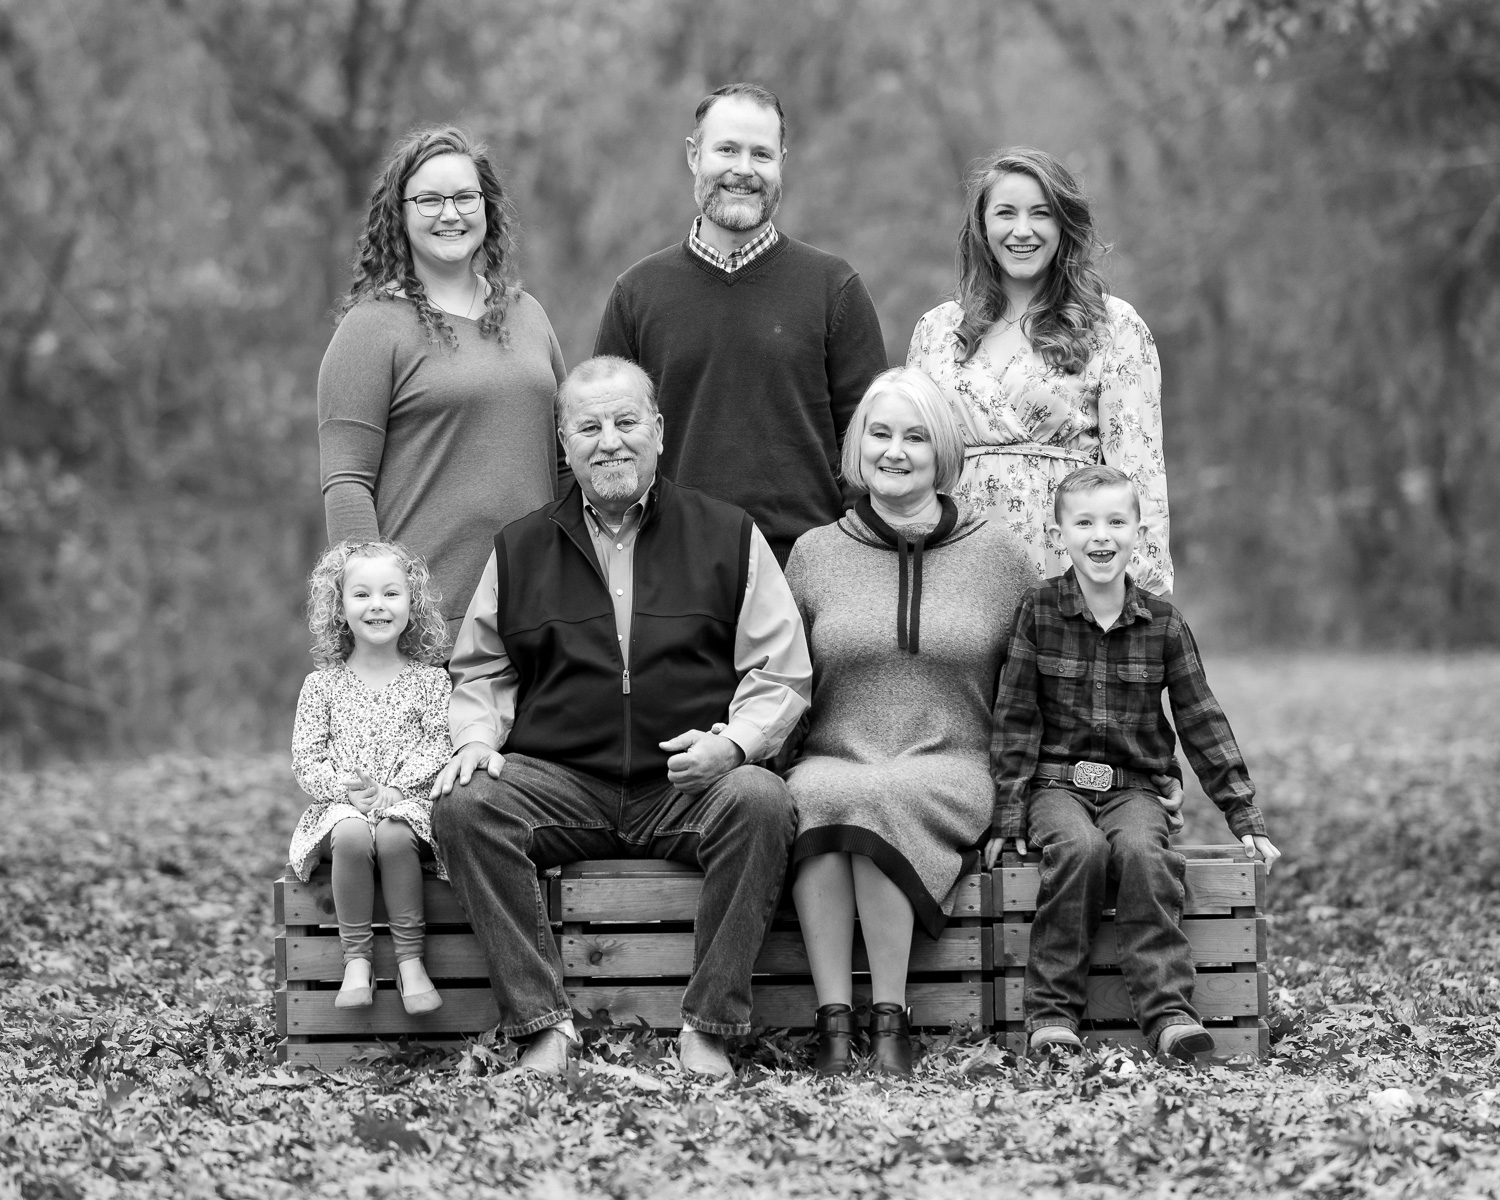 Black and white family photos. Grandparents, children, and grandchildren sitting on a bench in the forest.